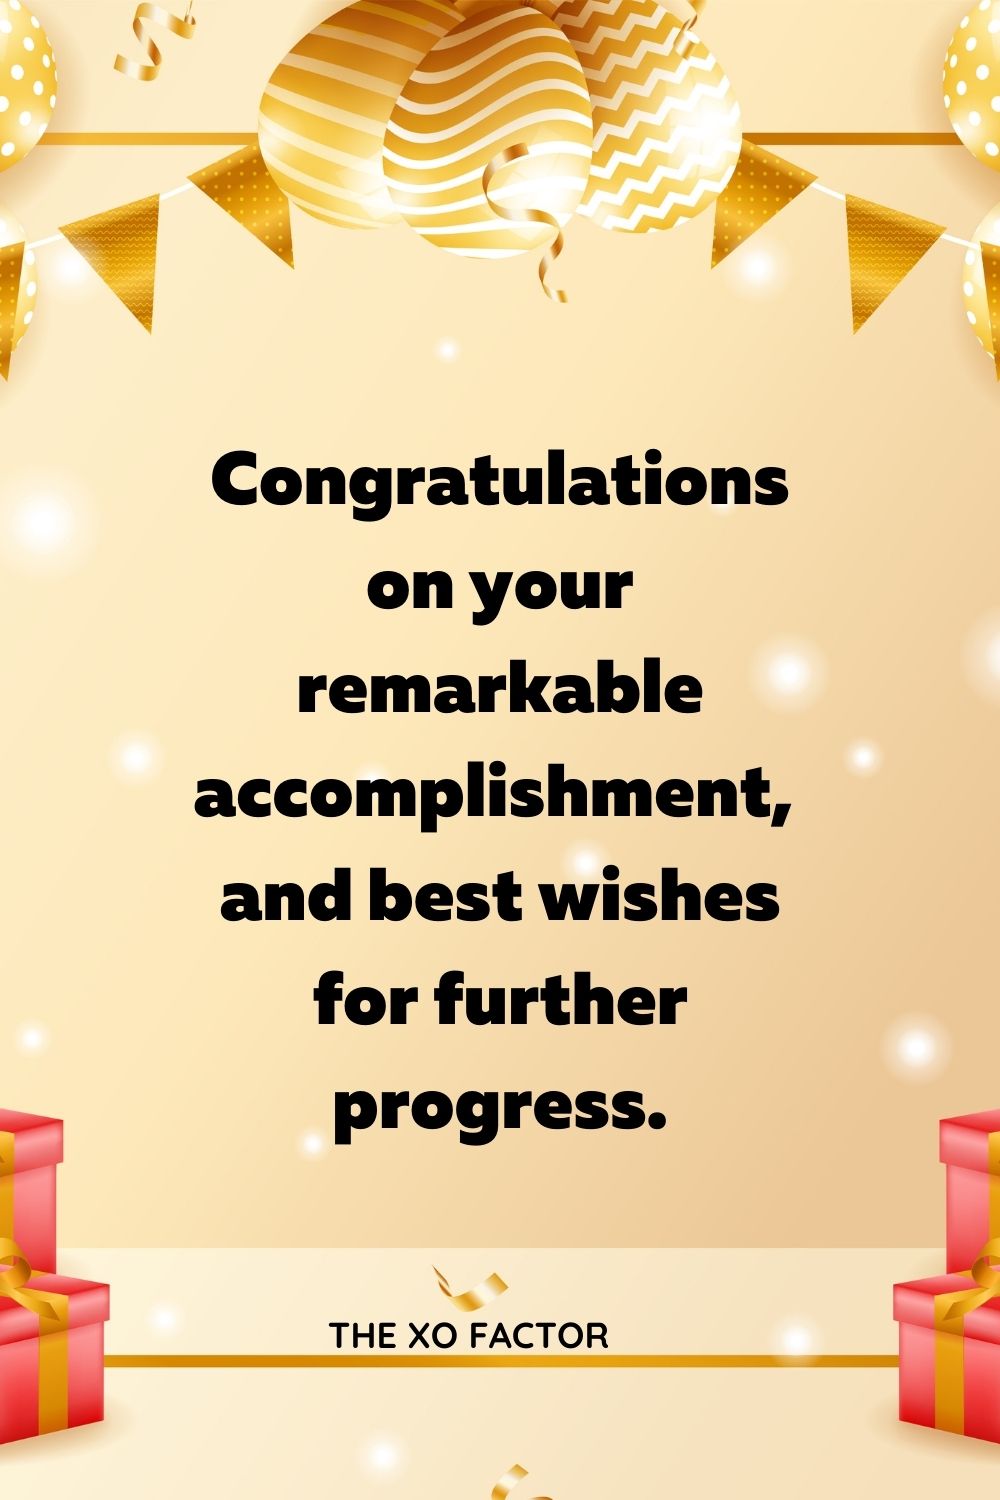 Congratulations on your remarkable accomplishment, and best wishes for further progress.